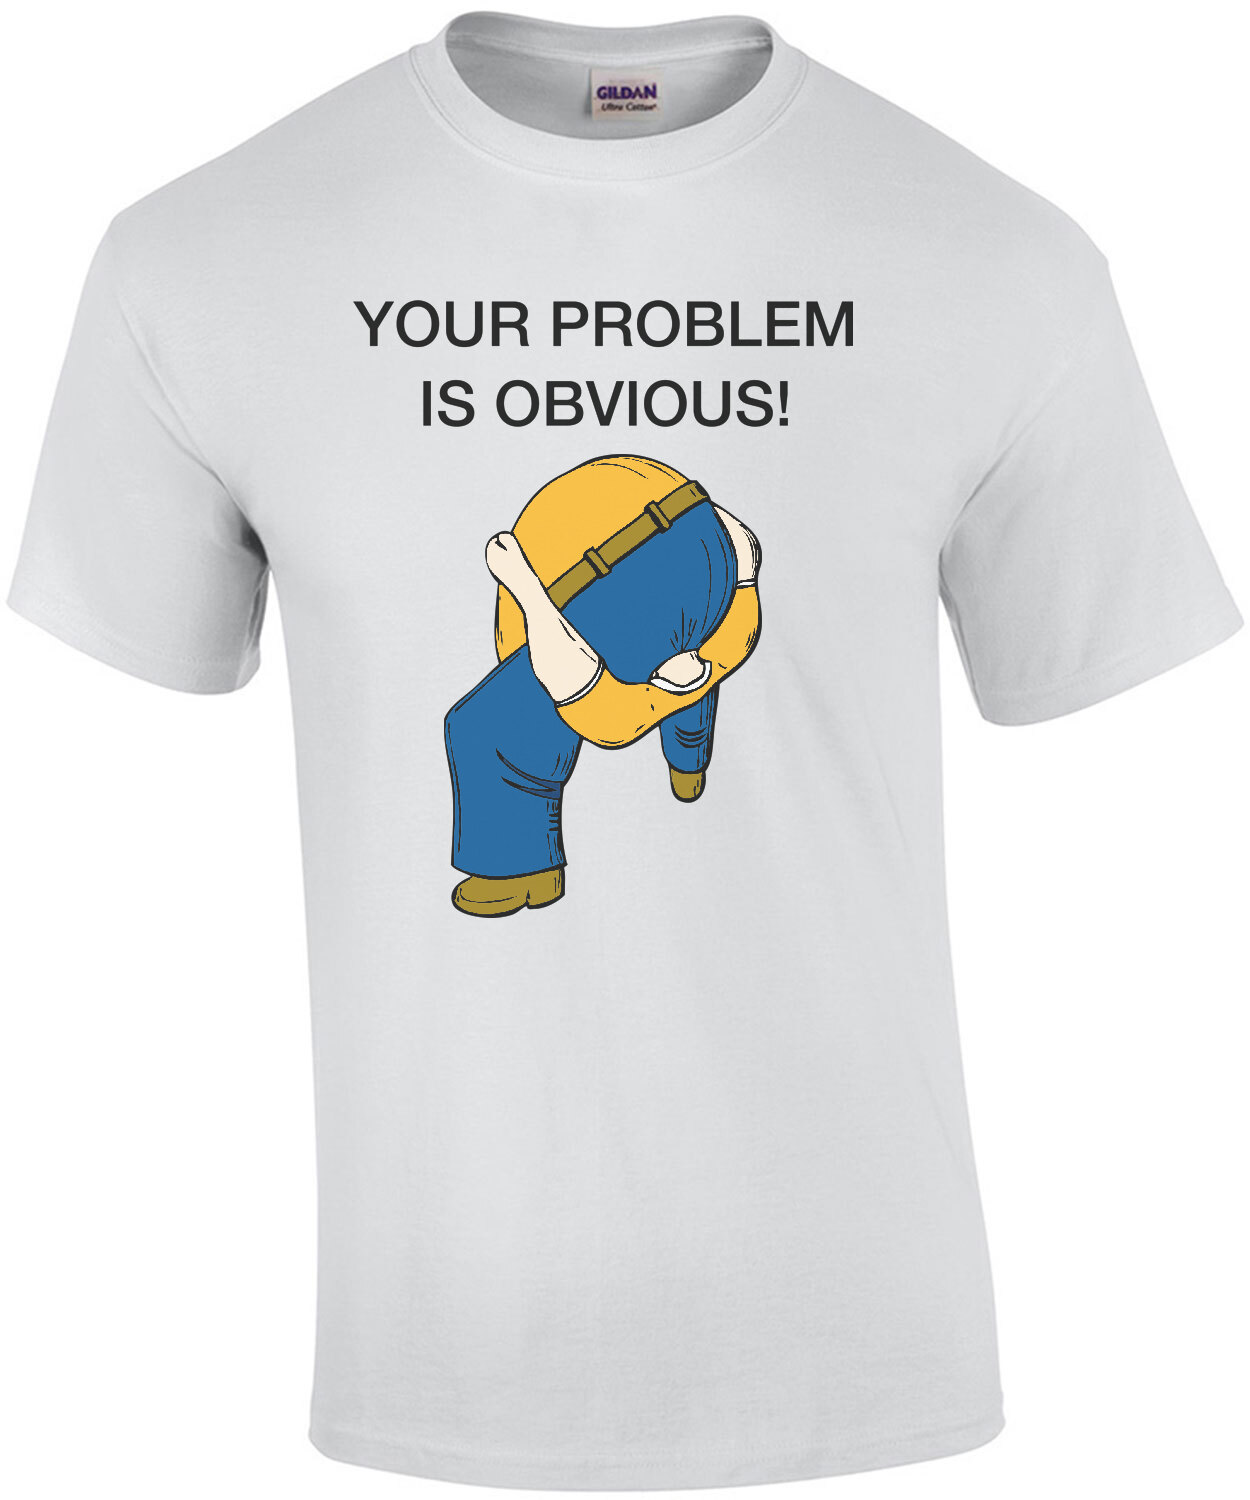 your-problem-is-obvious-shirt--head-up-ass-tshirt-3p.jpg